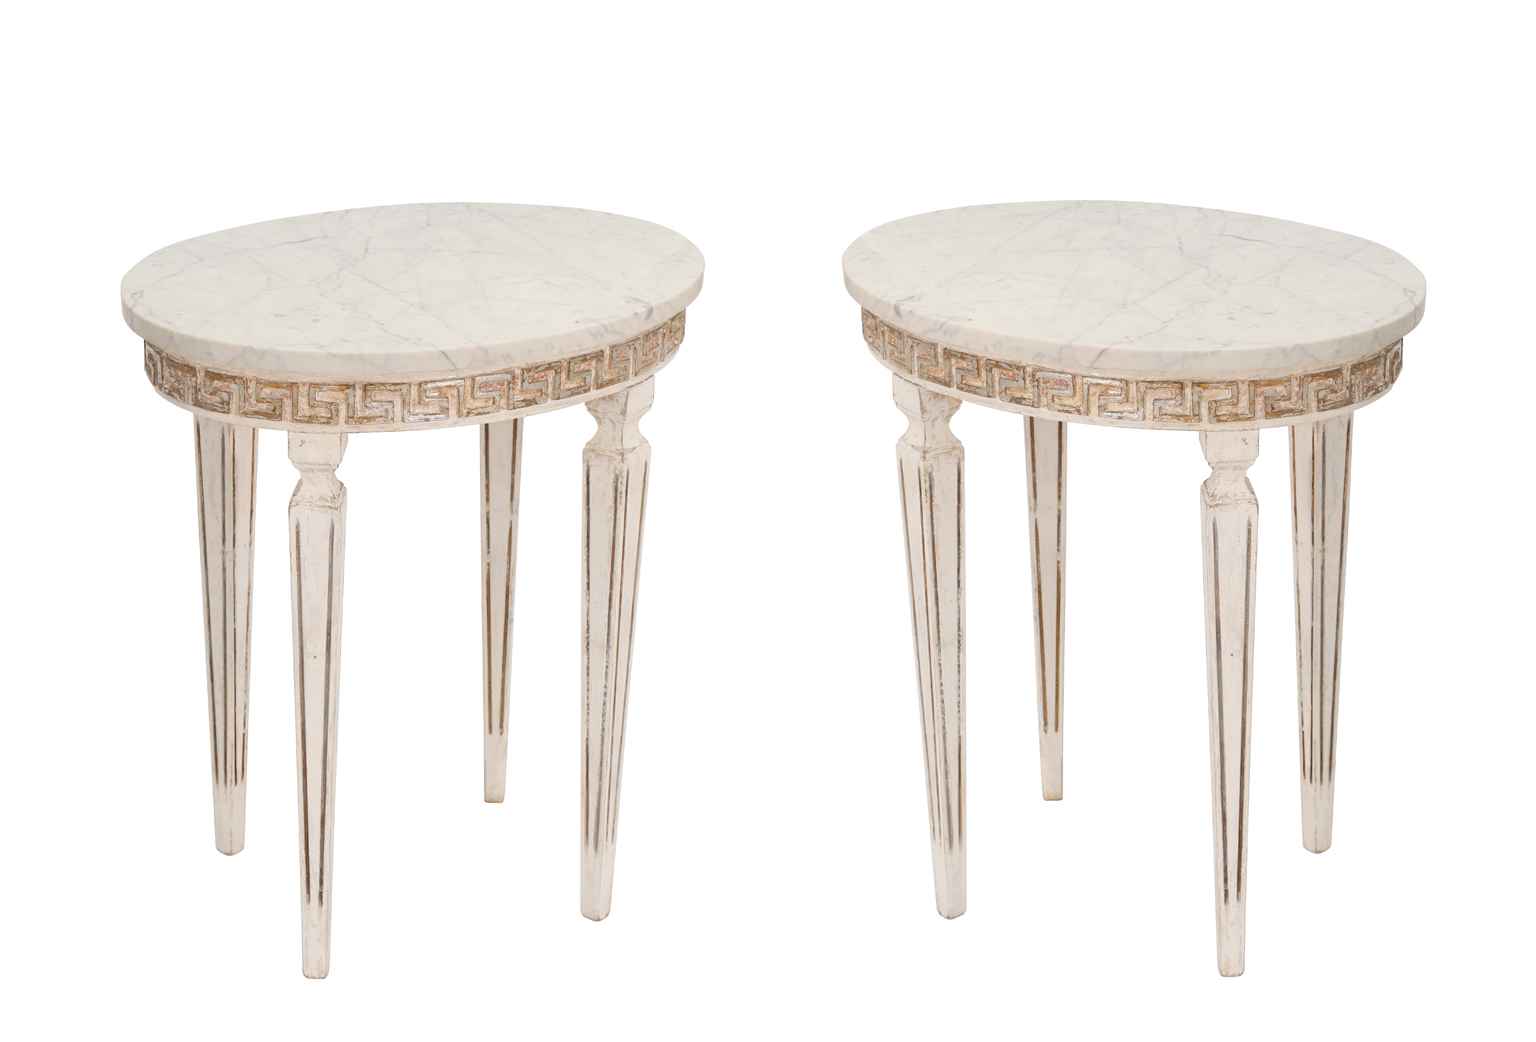 pair marble top italian accent tables with greek key apron table tiffany floor lamps tablecloth desk combo dale lamp bbq grill worldwide furniture outdoor stone side target throw